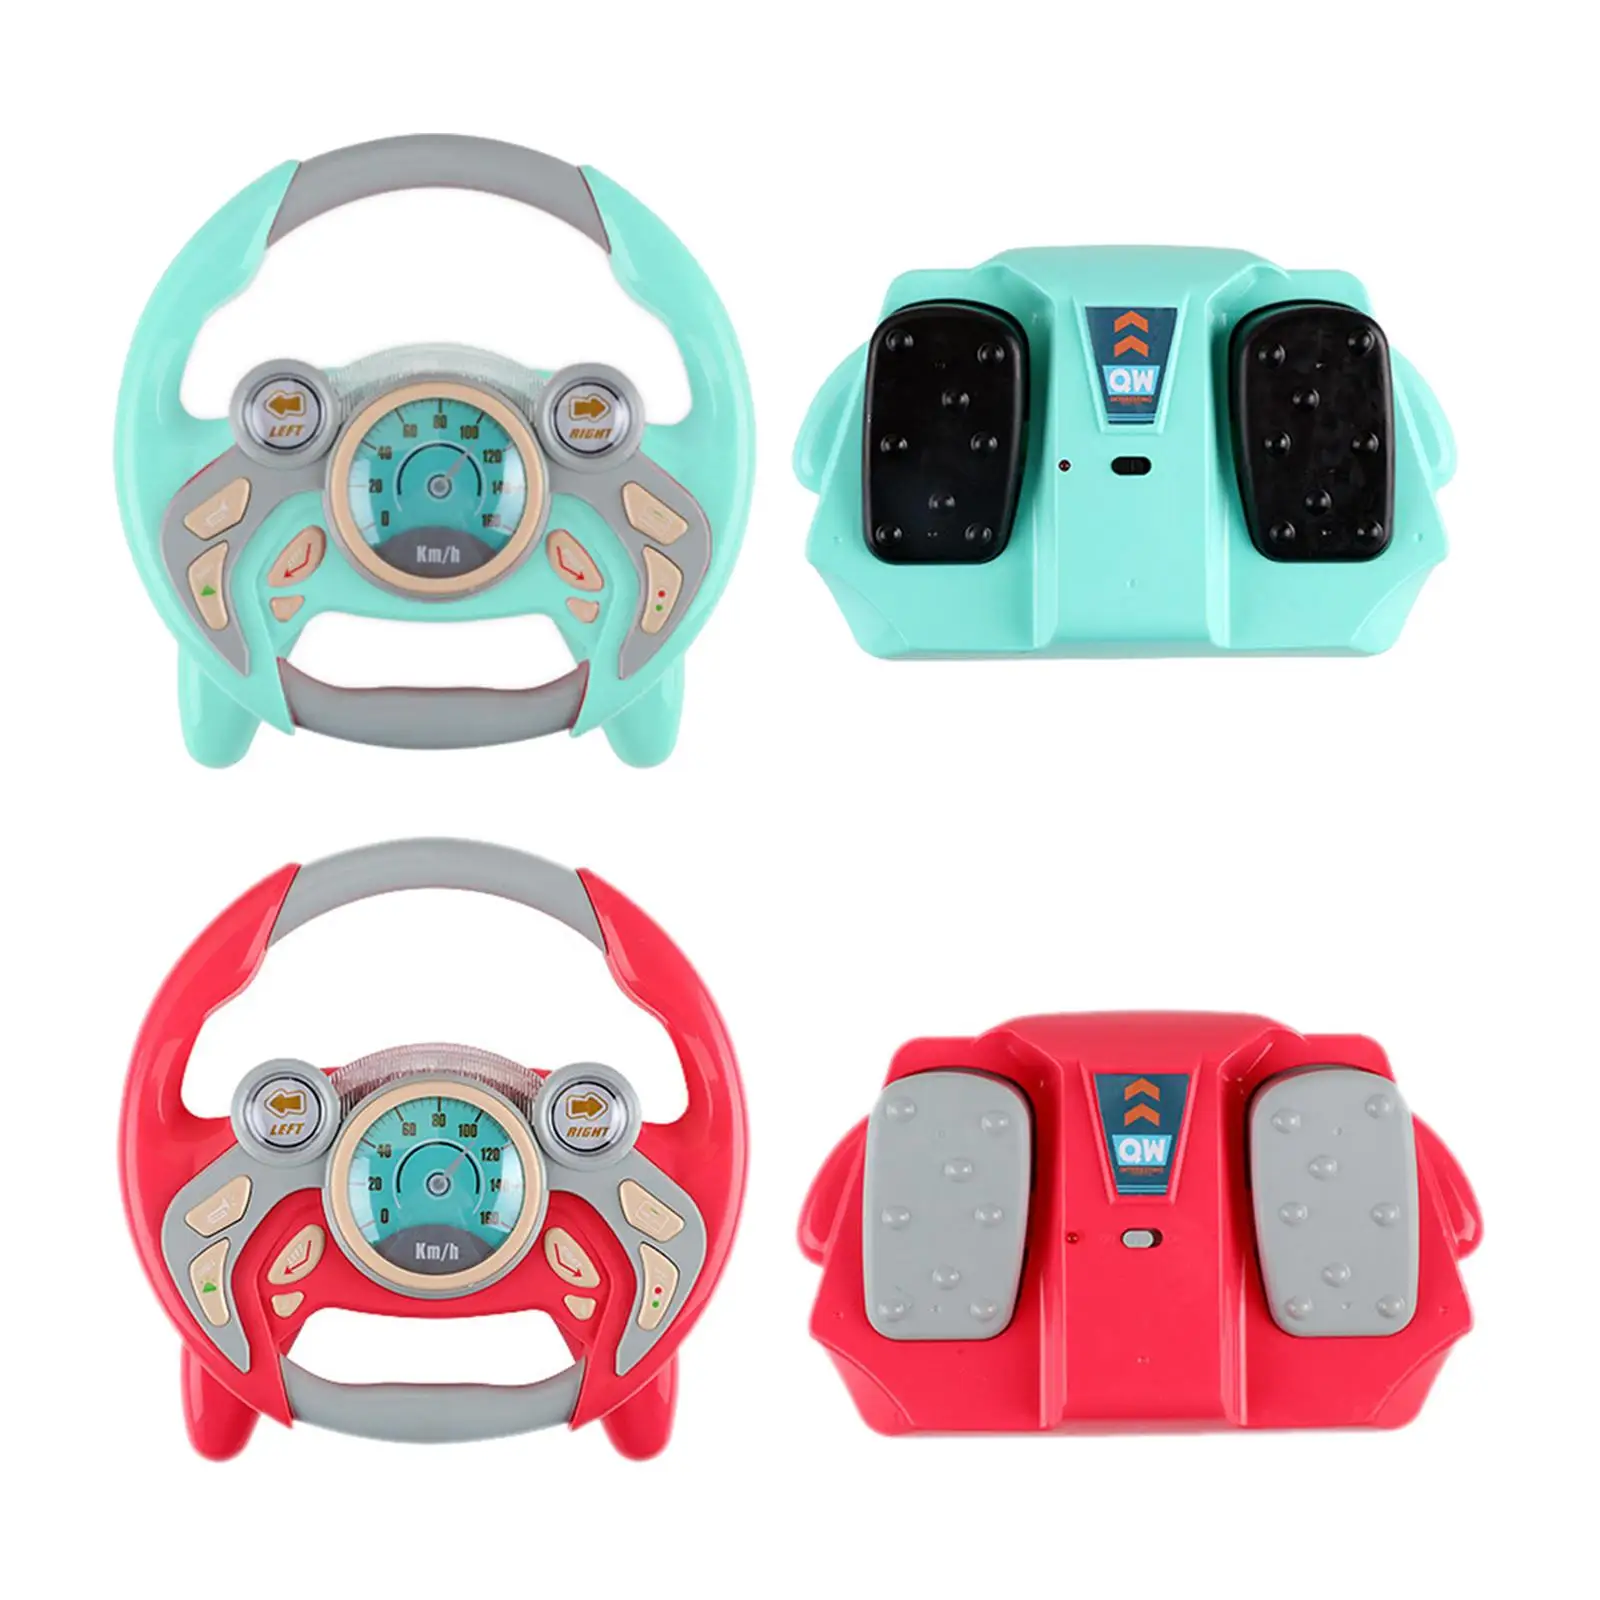 Simulated Steering Wheel for Kids W/Light music Gifts Sounding Toy Early Educational Sounding Toy Simulate Driving